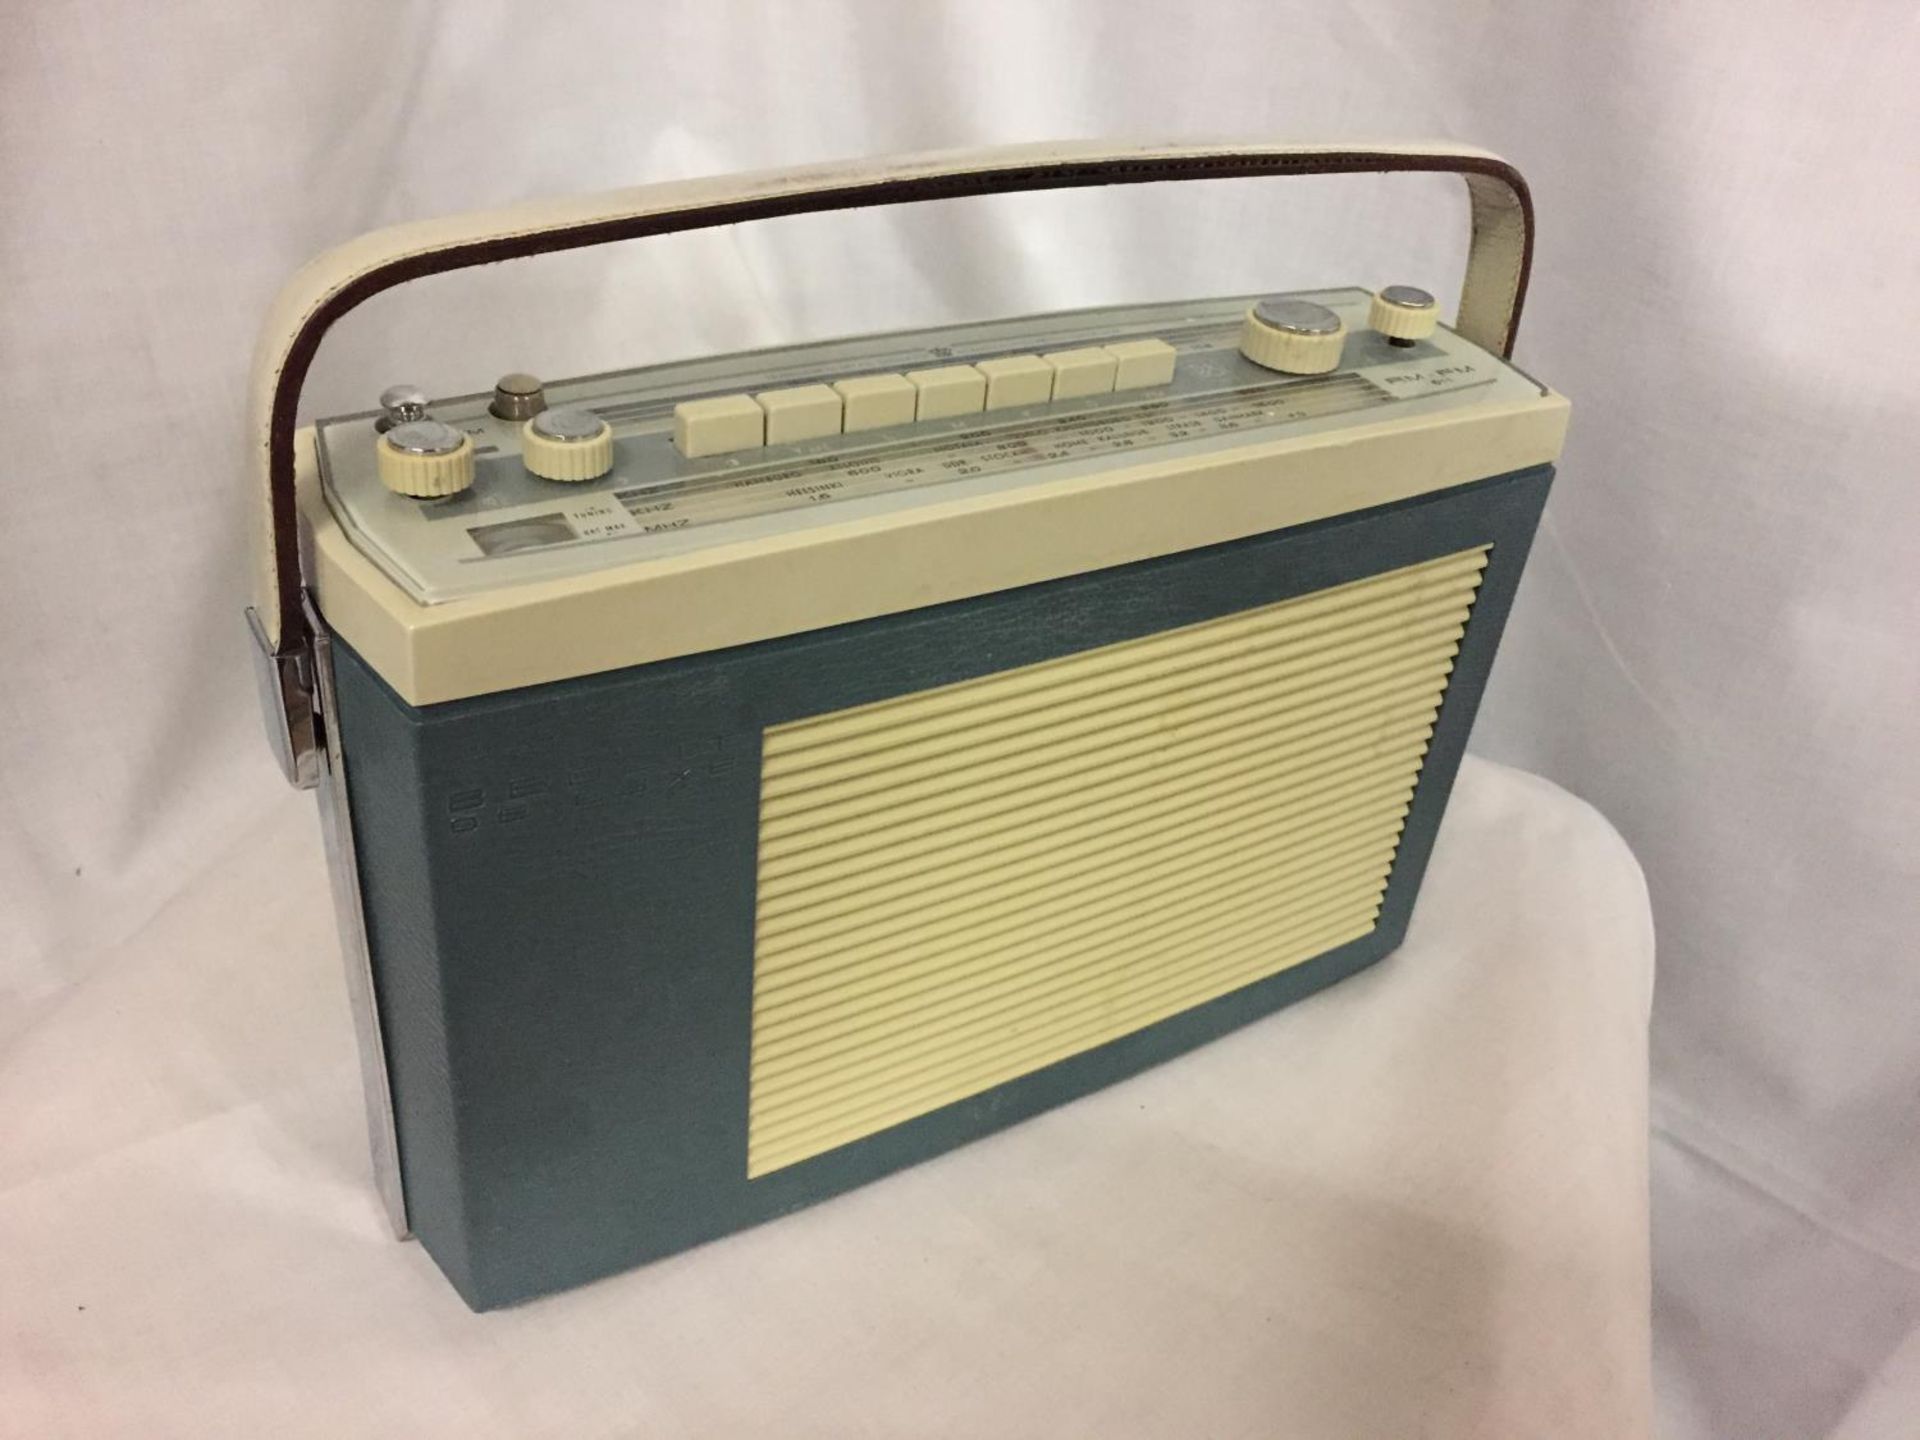 A RETRO BANG AND OLUFSEN RADIO IN A CREAM AND BLUE COLOUR - Image 4 of 5